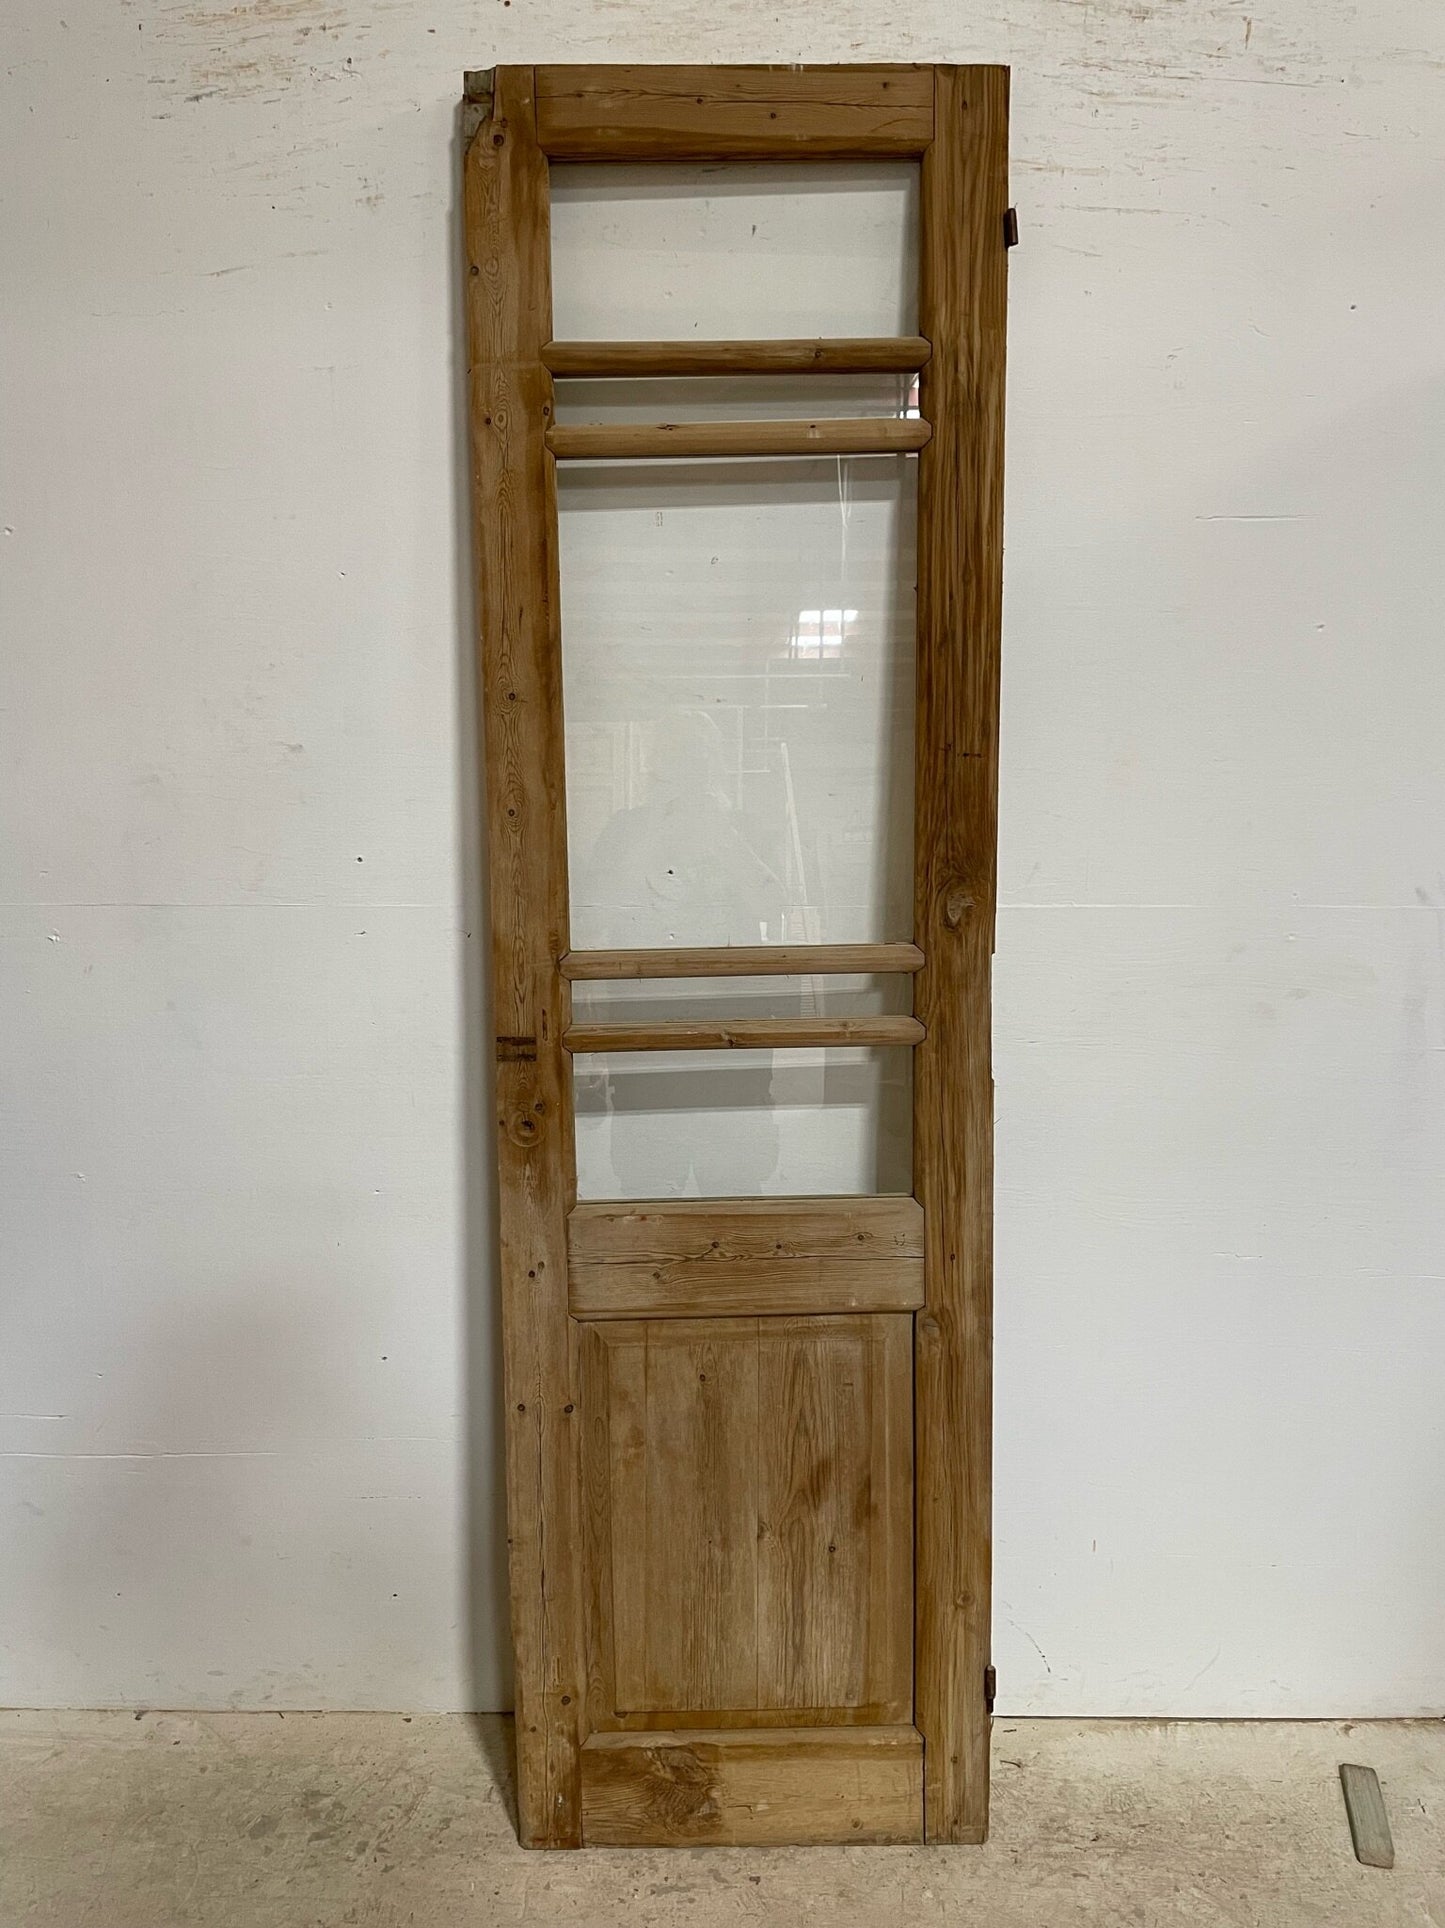 Antique French door (86.5x24.25) with glass F0879